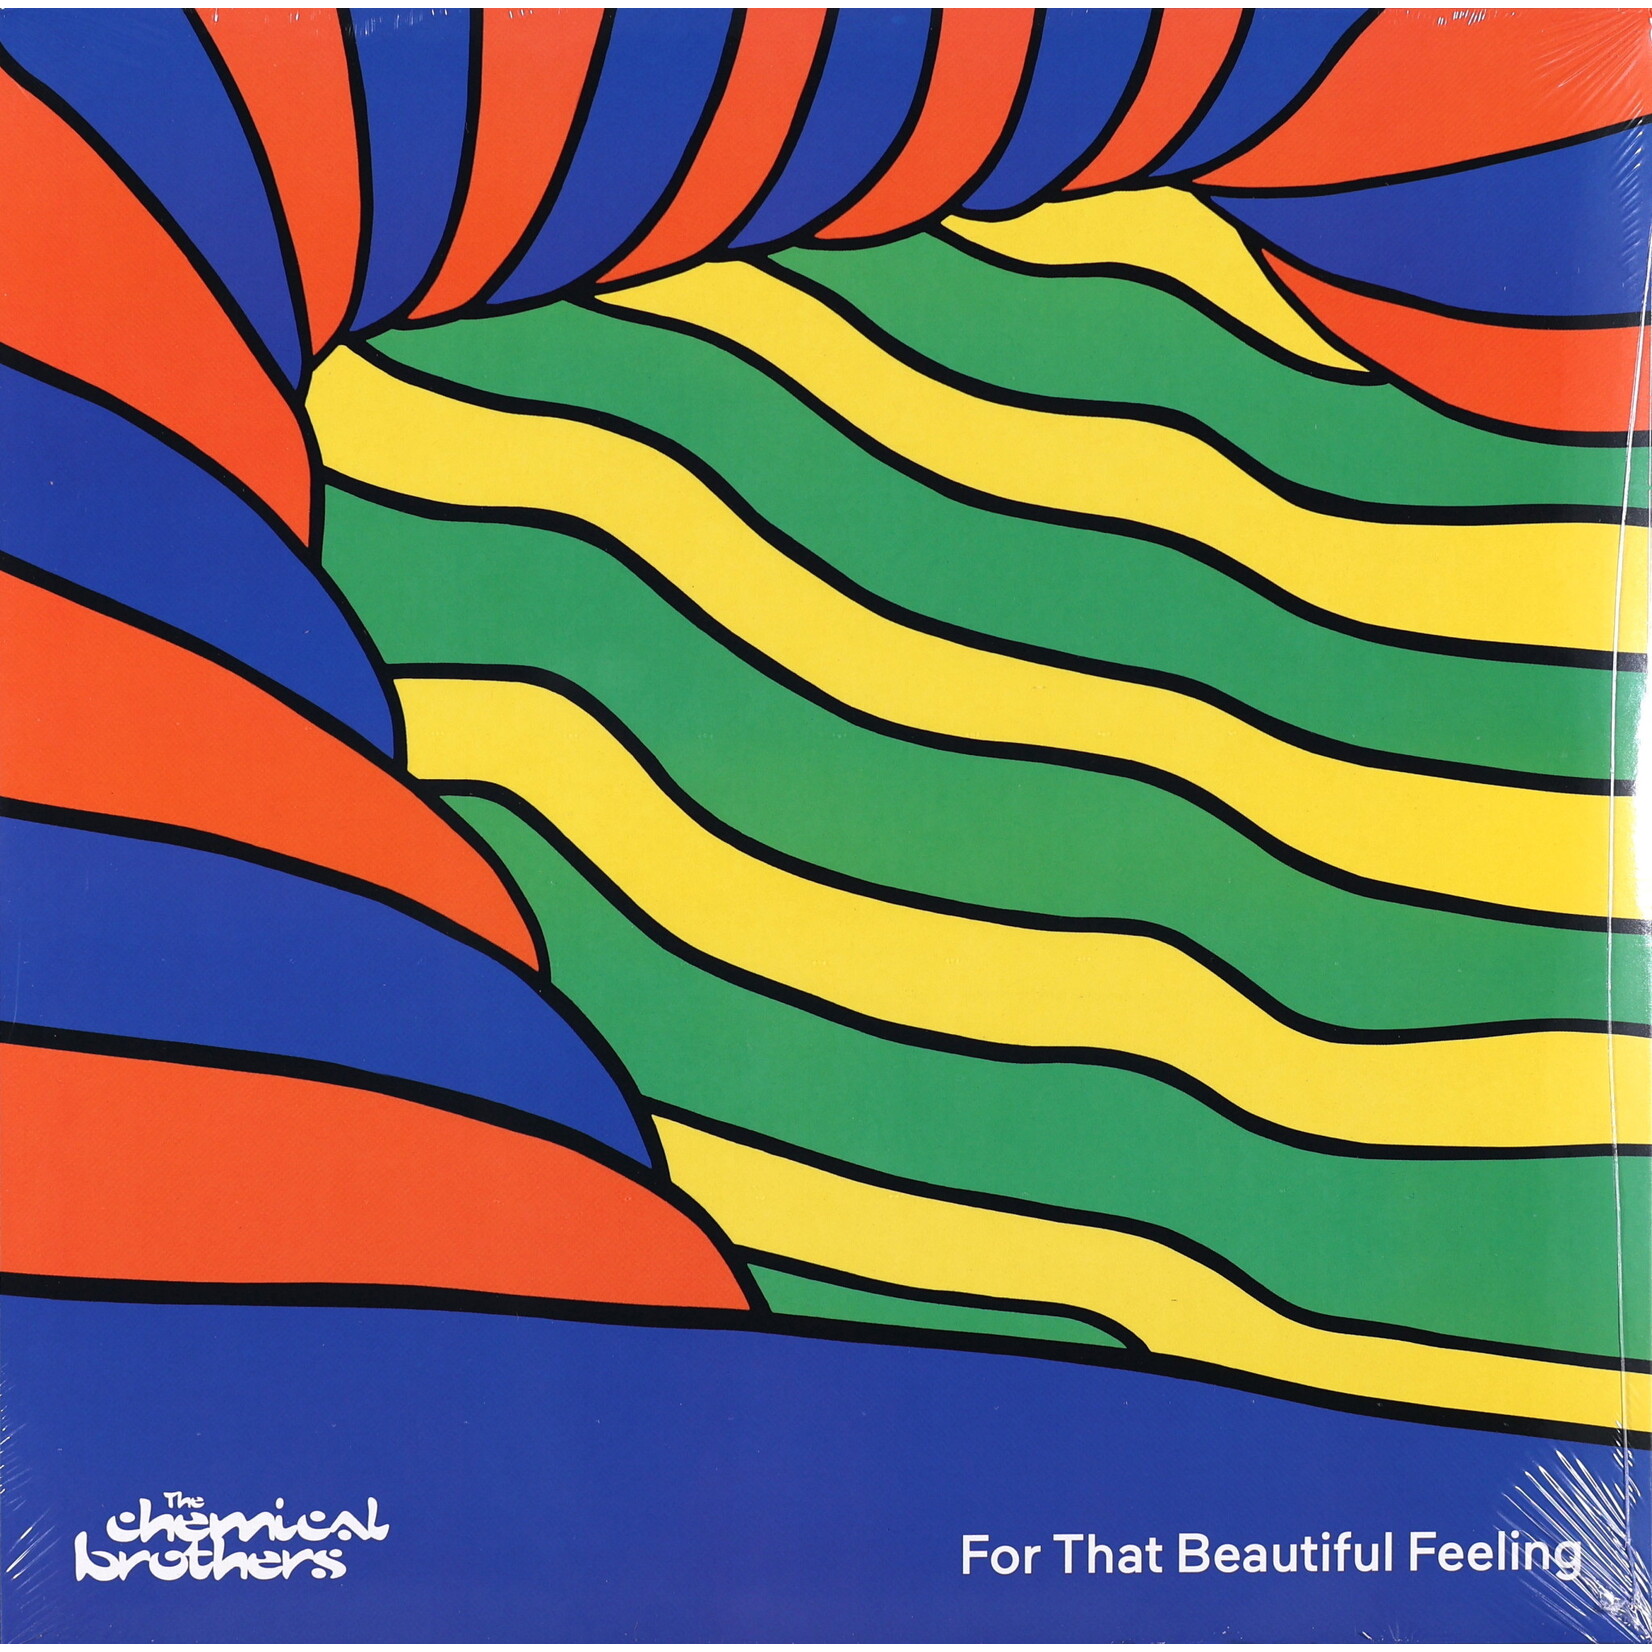 CHEMICAL BROTHERS - FOR THAT BEAUTIFUL FEELING - 2LP